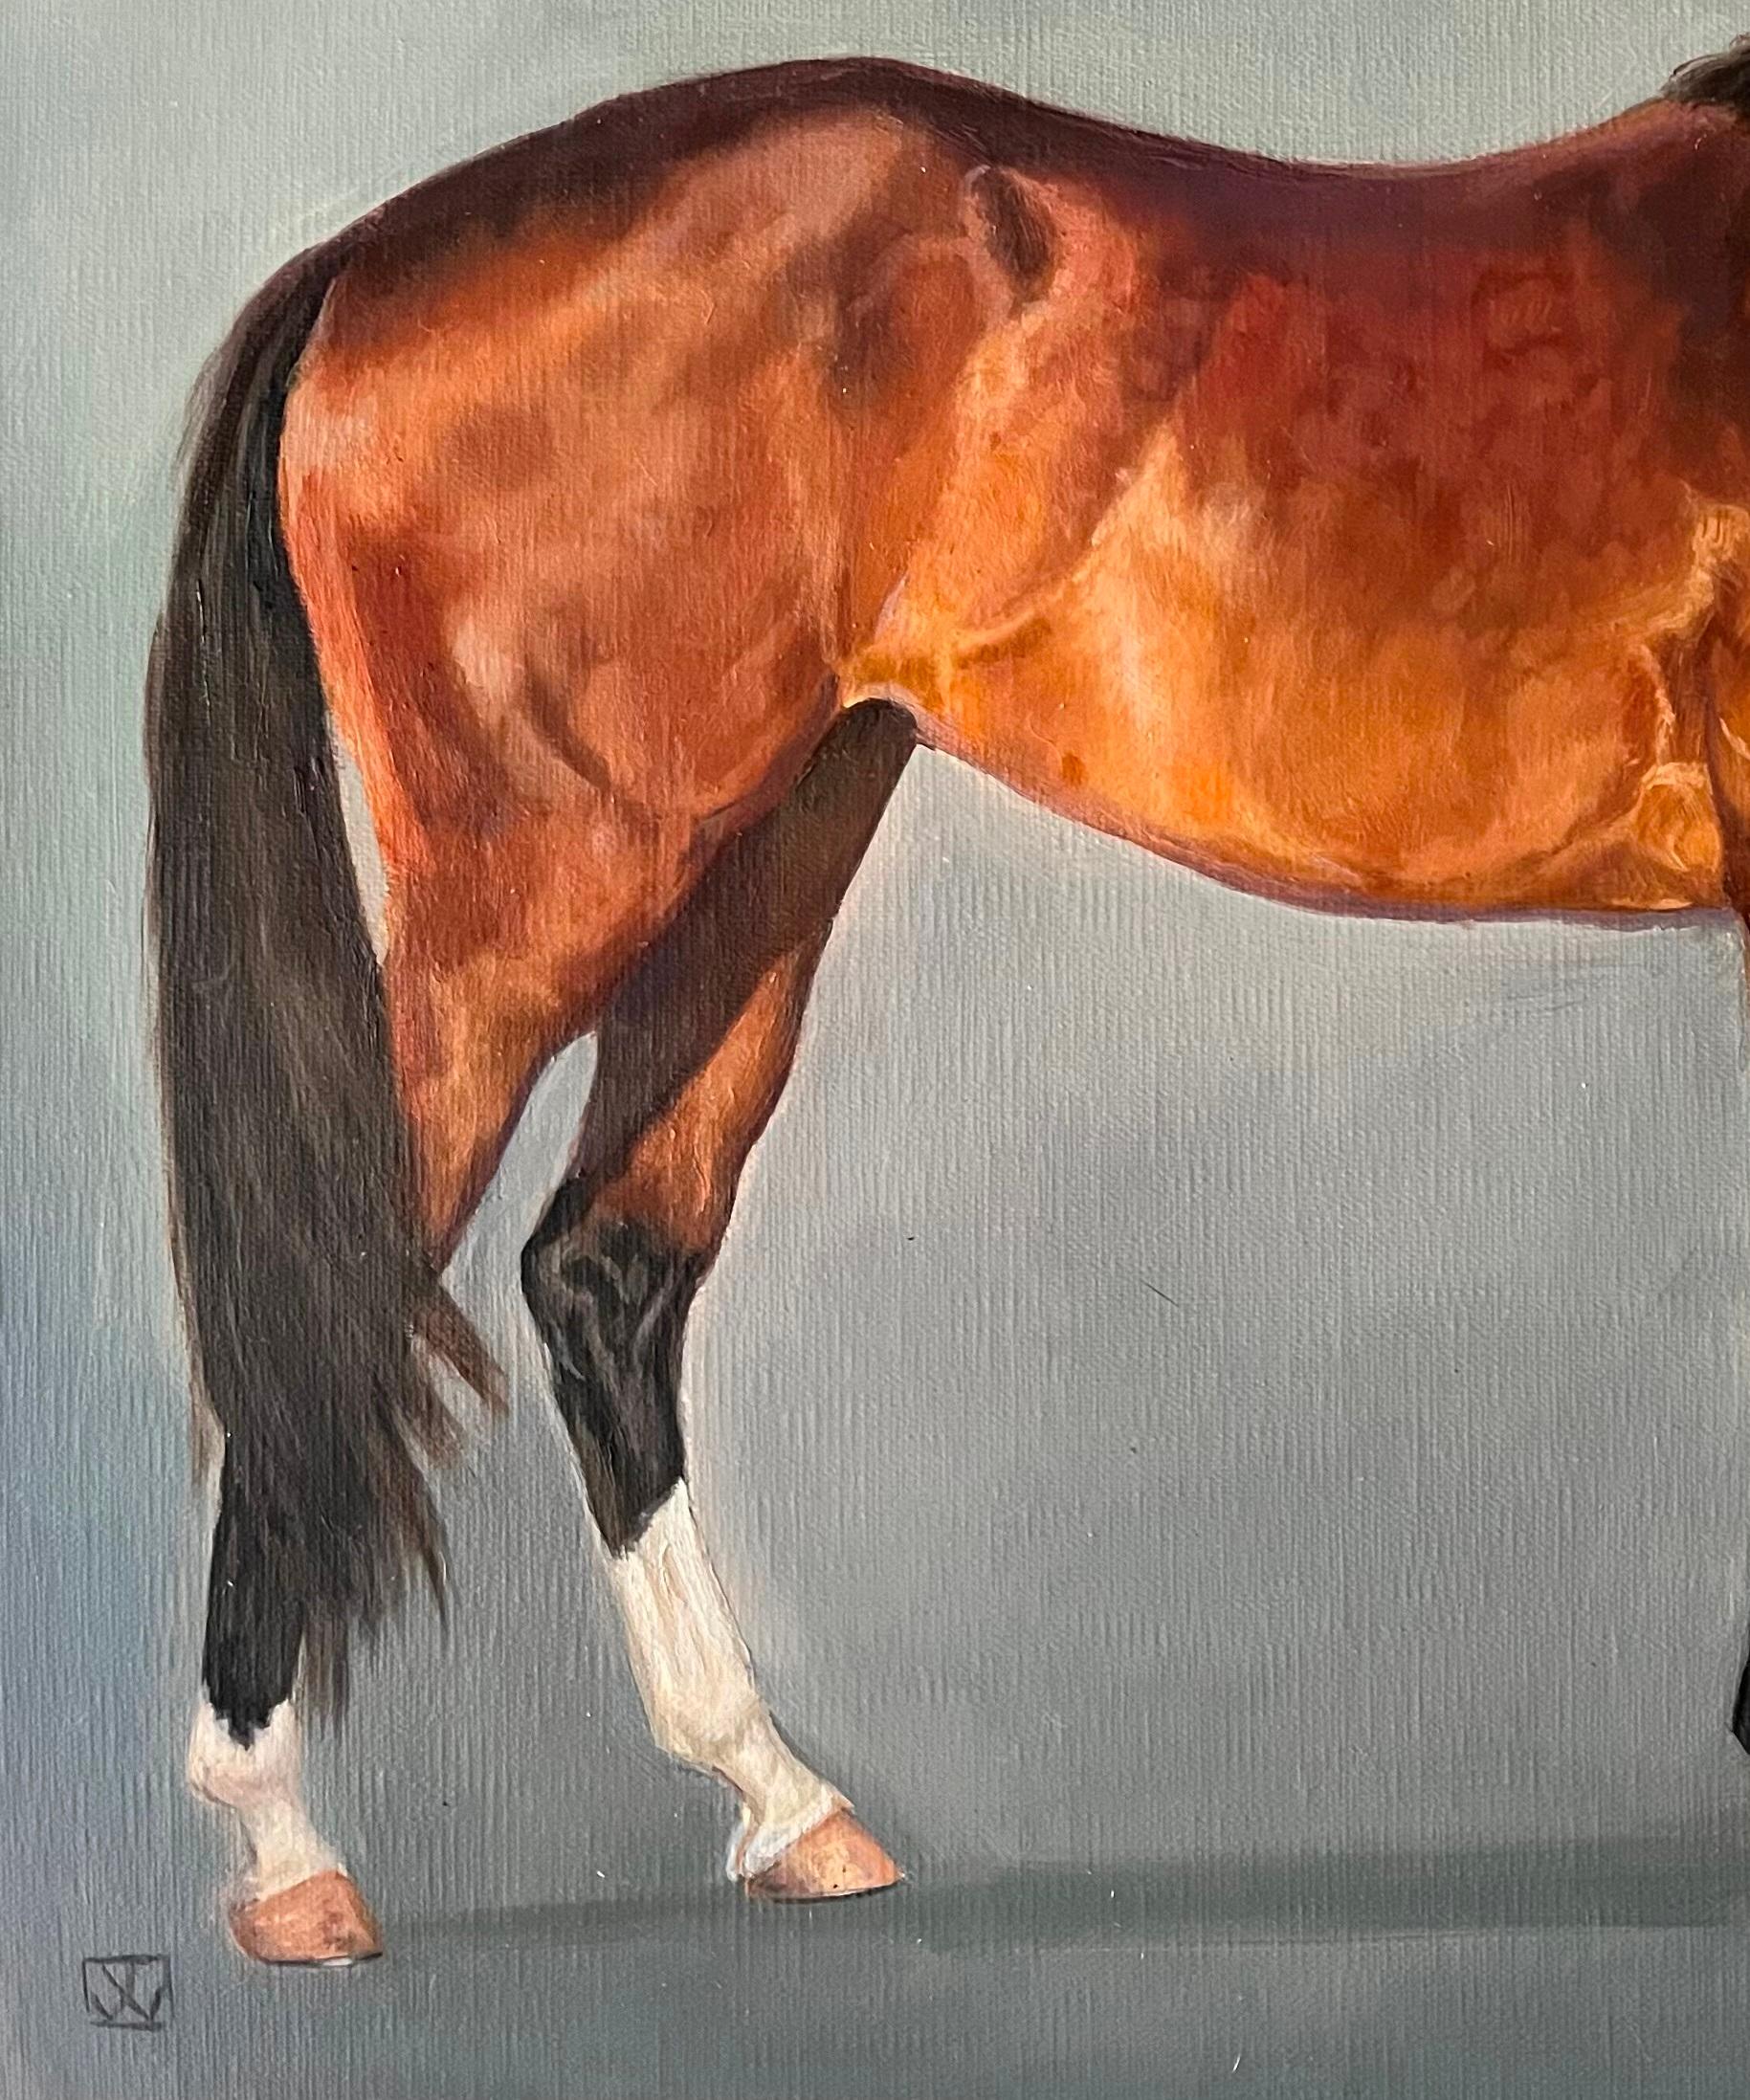 A Frightened Bay Horse Which Needs to be Treated with Special Care - Realist Painting by Valarie Wolf